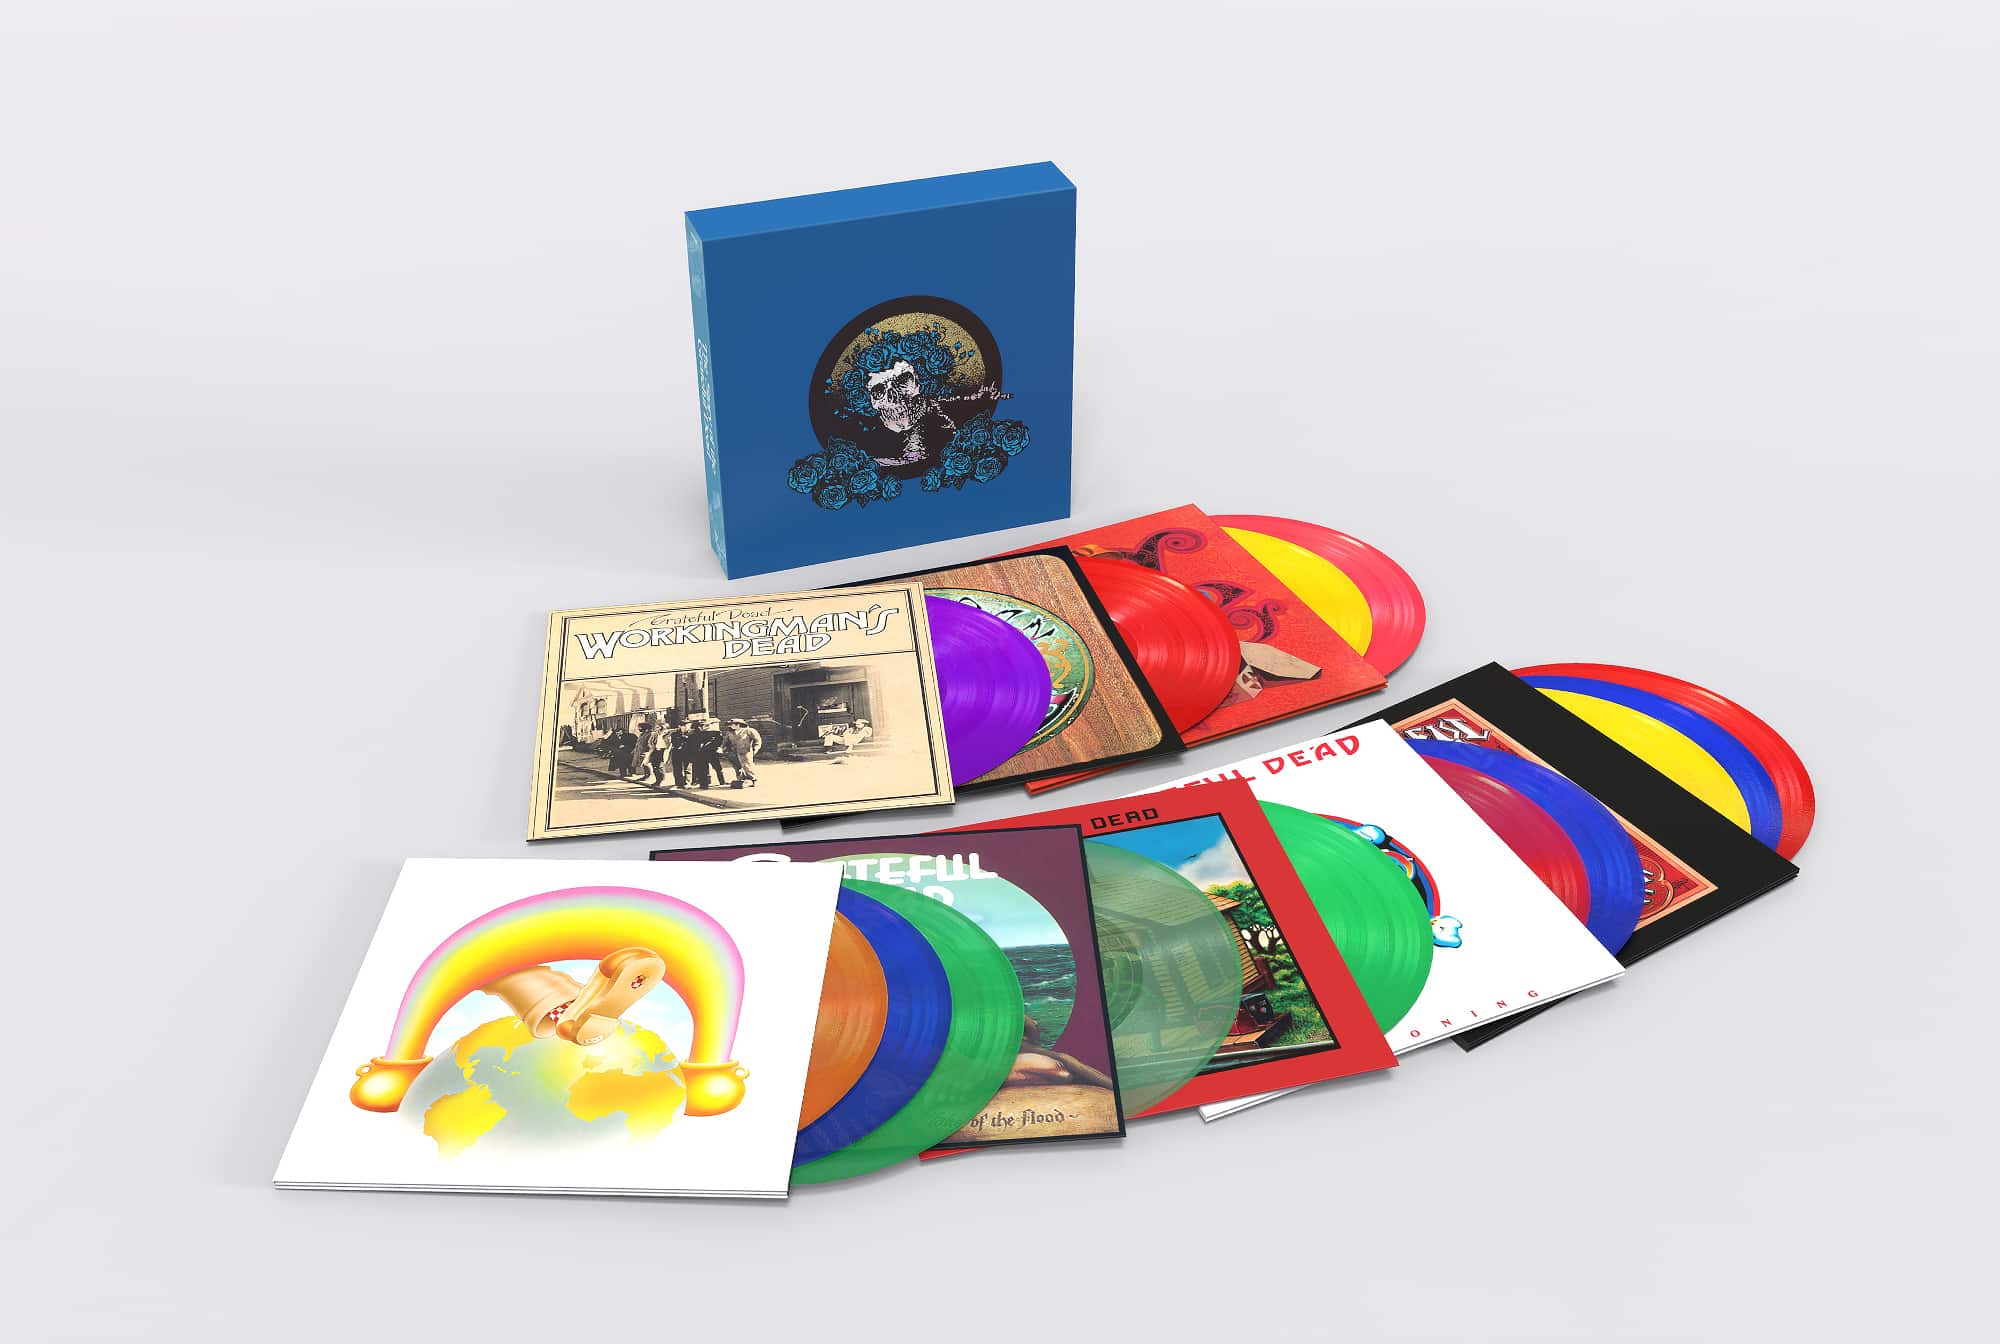 Grateful Dead Box Set Offers Essential Albums and Contemporary Commentary